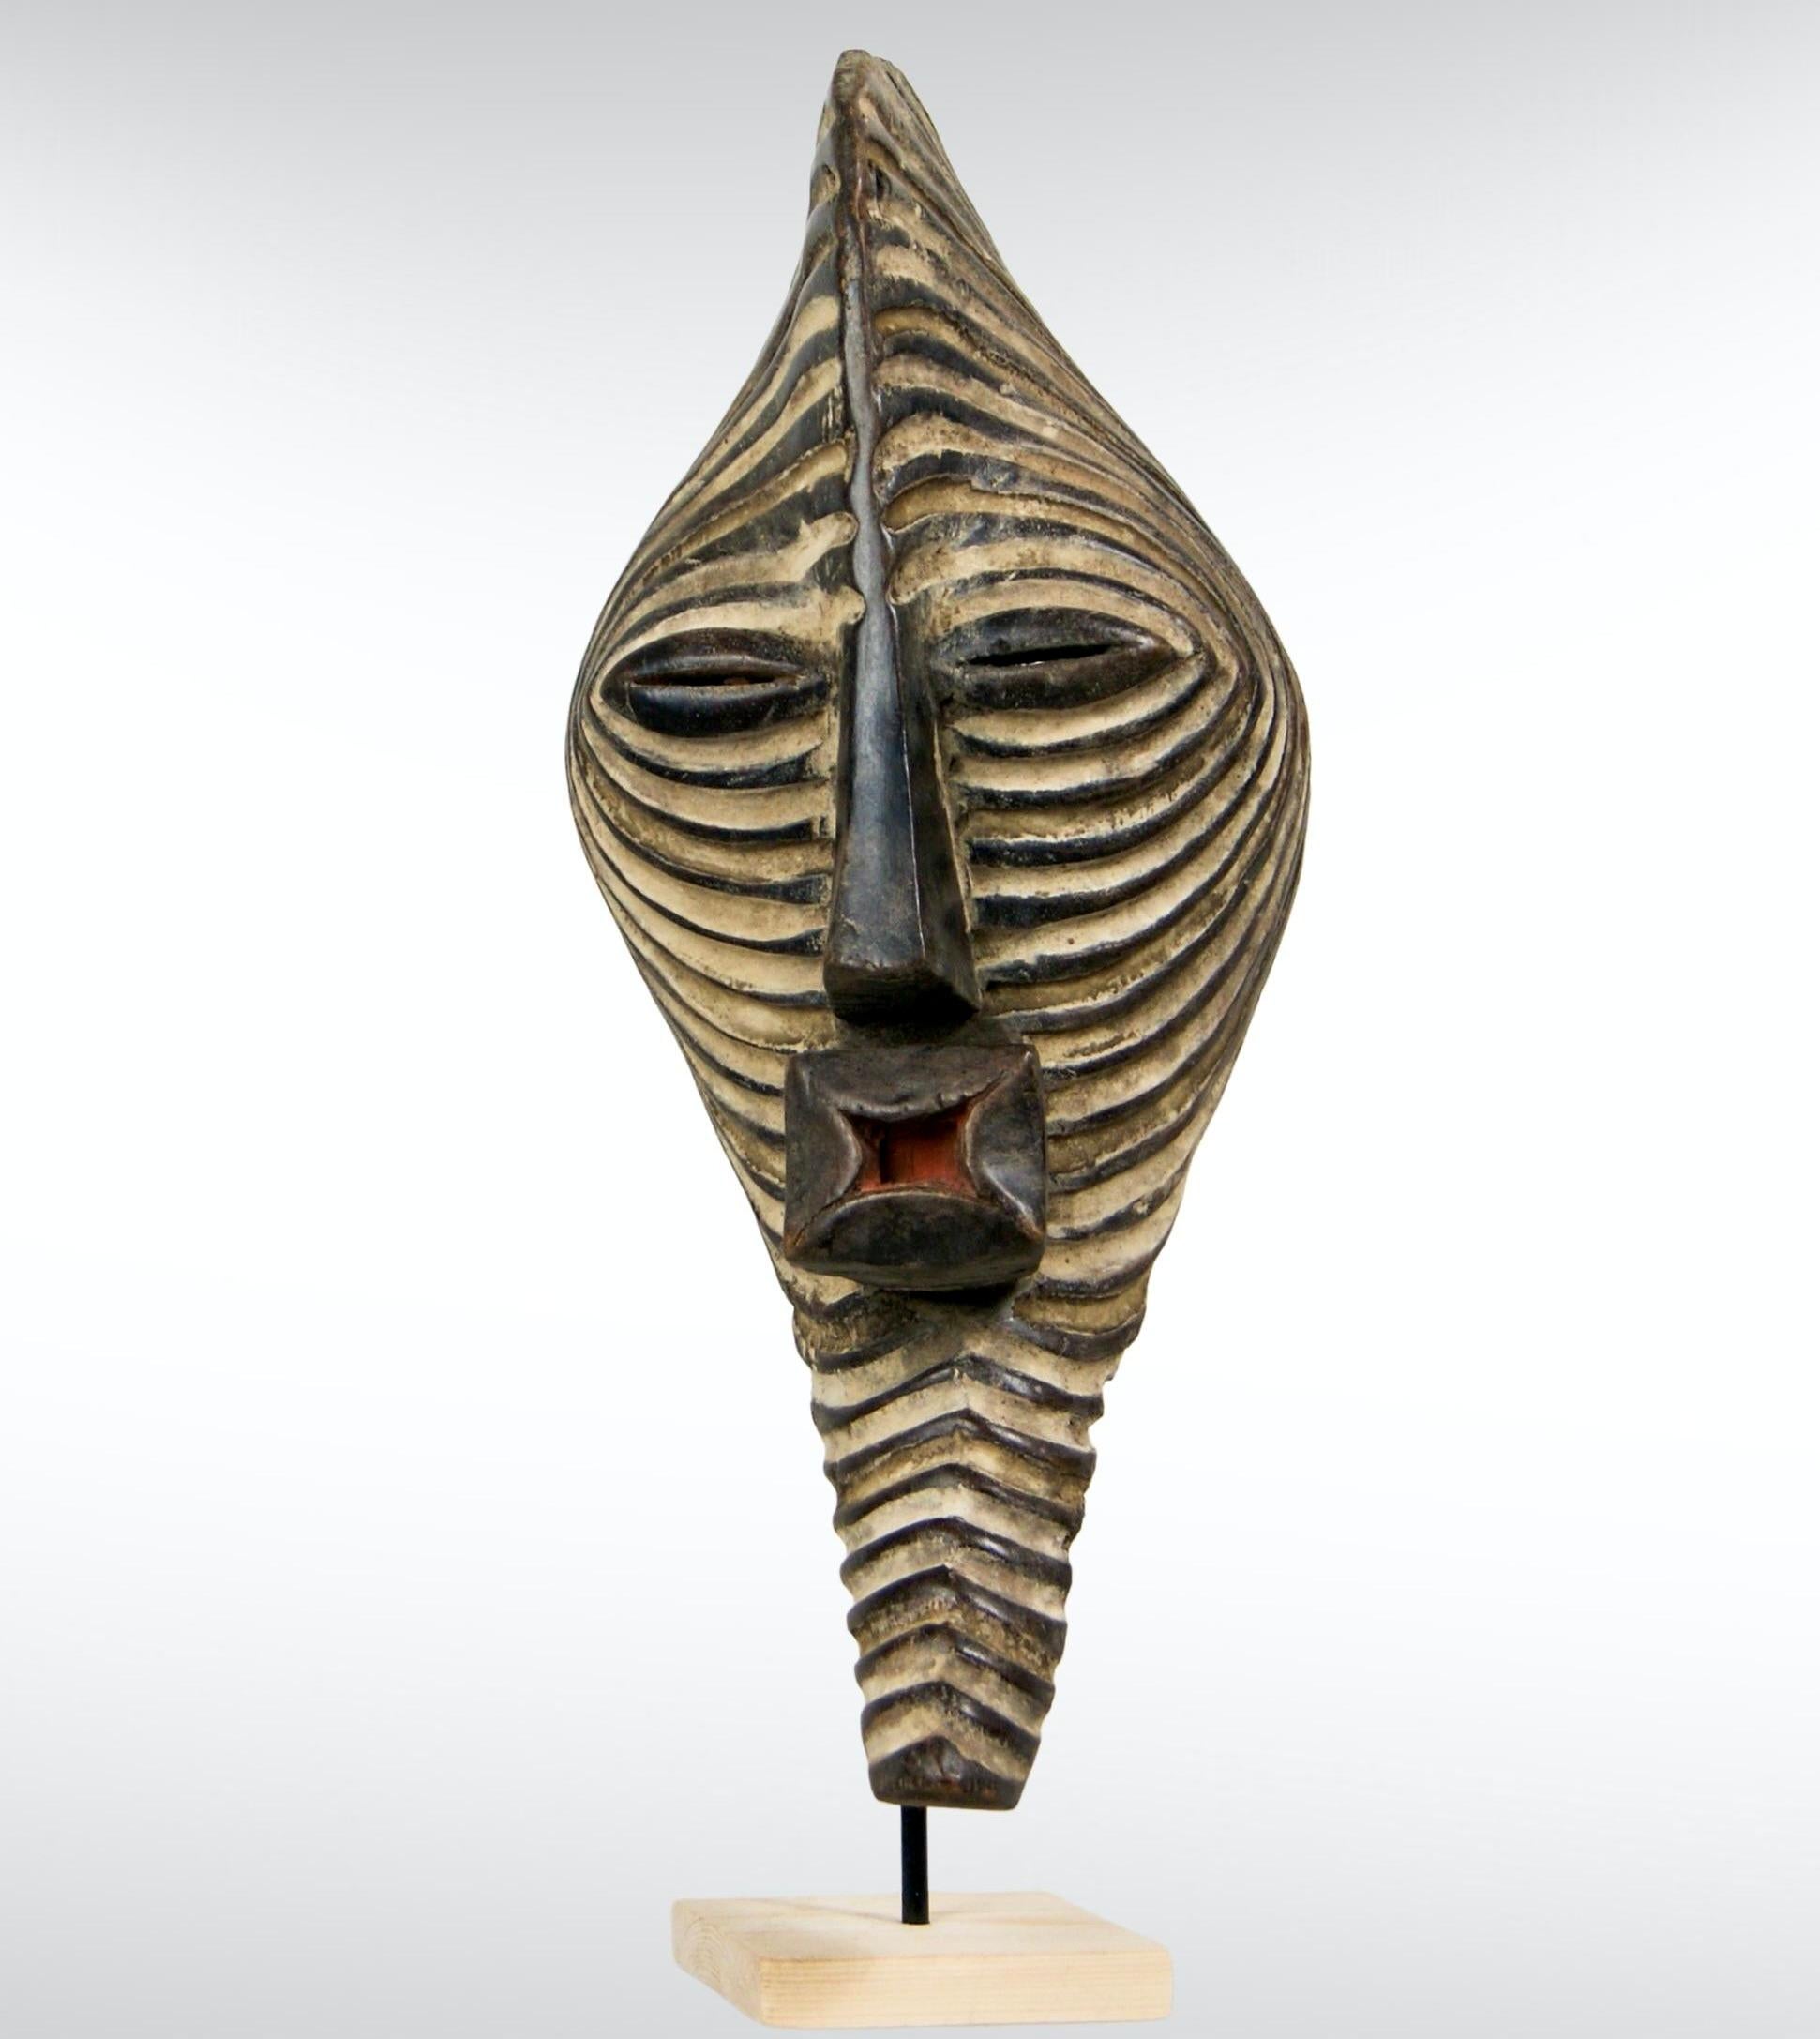 Large sized Songye Male Kifwebe mask from The Congo circa 1910s.
Traditionally, the Kifwebe mask is very symbolic in the Bantu culture of central Africa.
Male Kifwebe masks were mainly used for initiation ceremonies, circumcisions, enthronements and